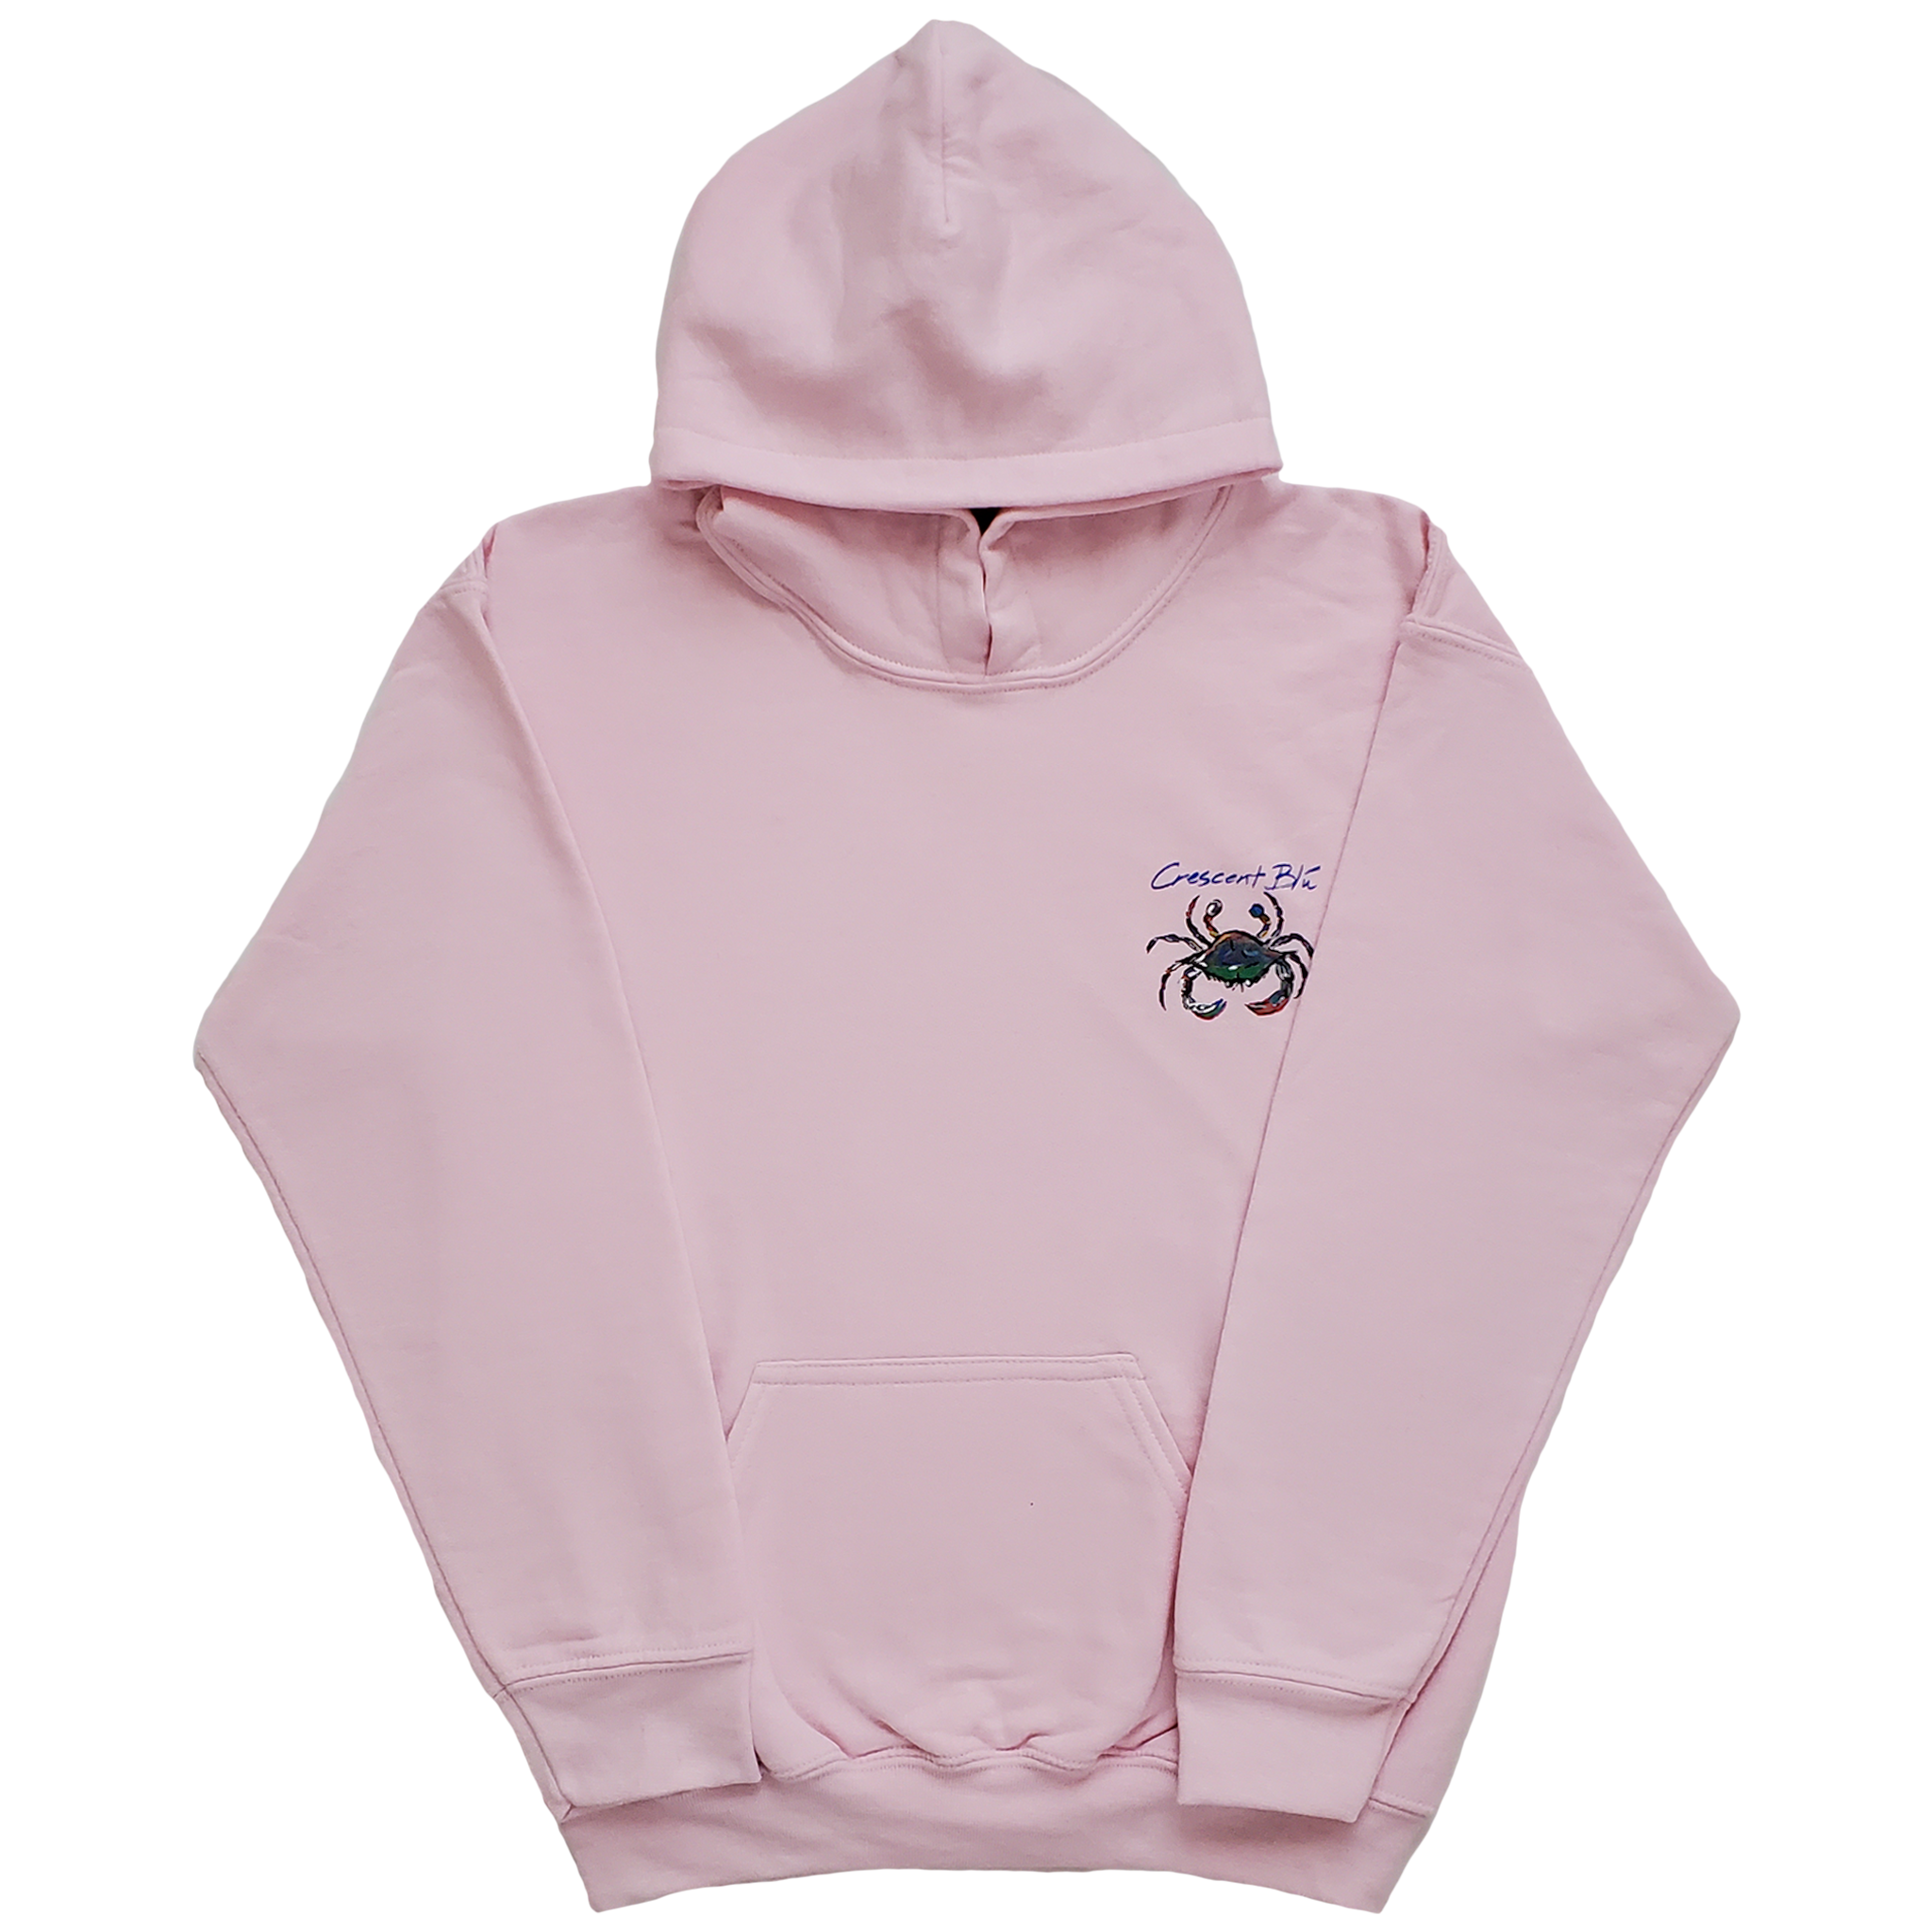 Classic pale pink hooded sweatshirt with Crescent Blu on the left chest above a multi-colored blue crab. Center pocket, ribbed cuffs. 